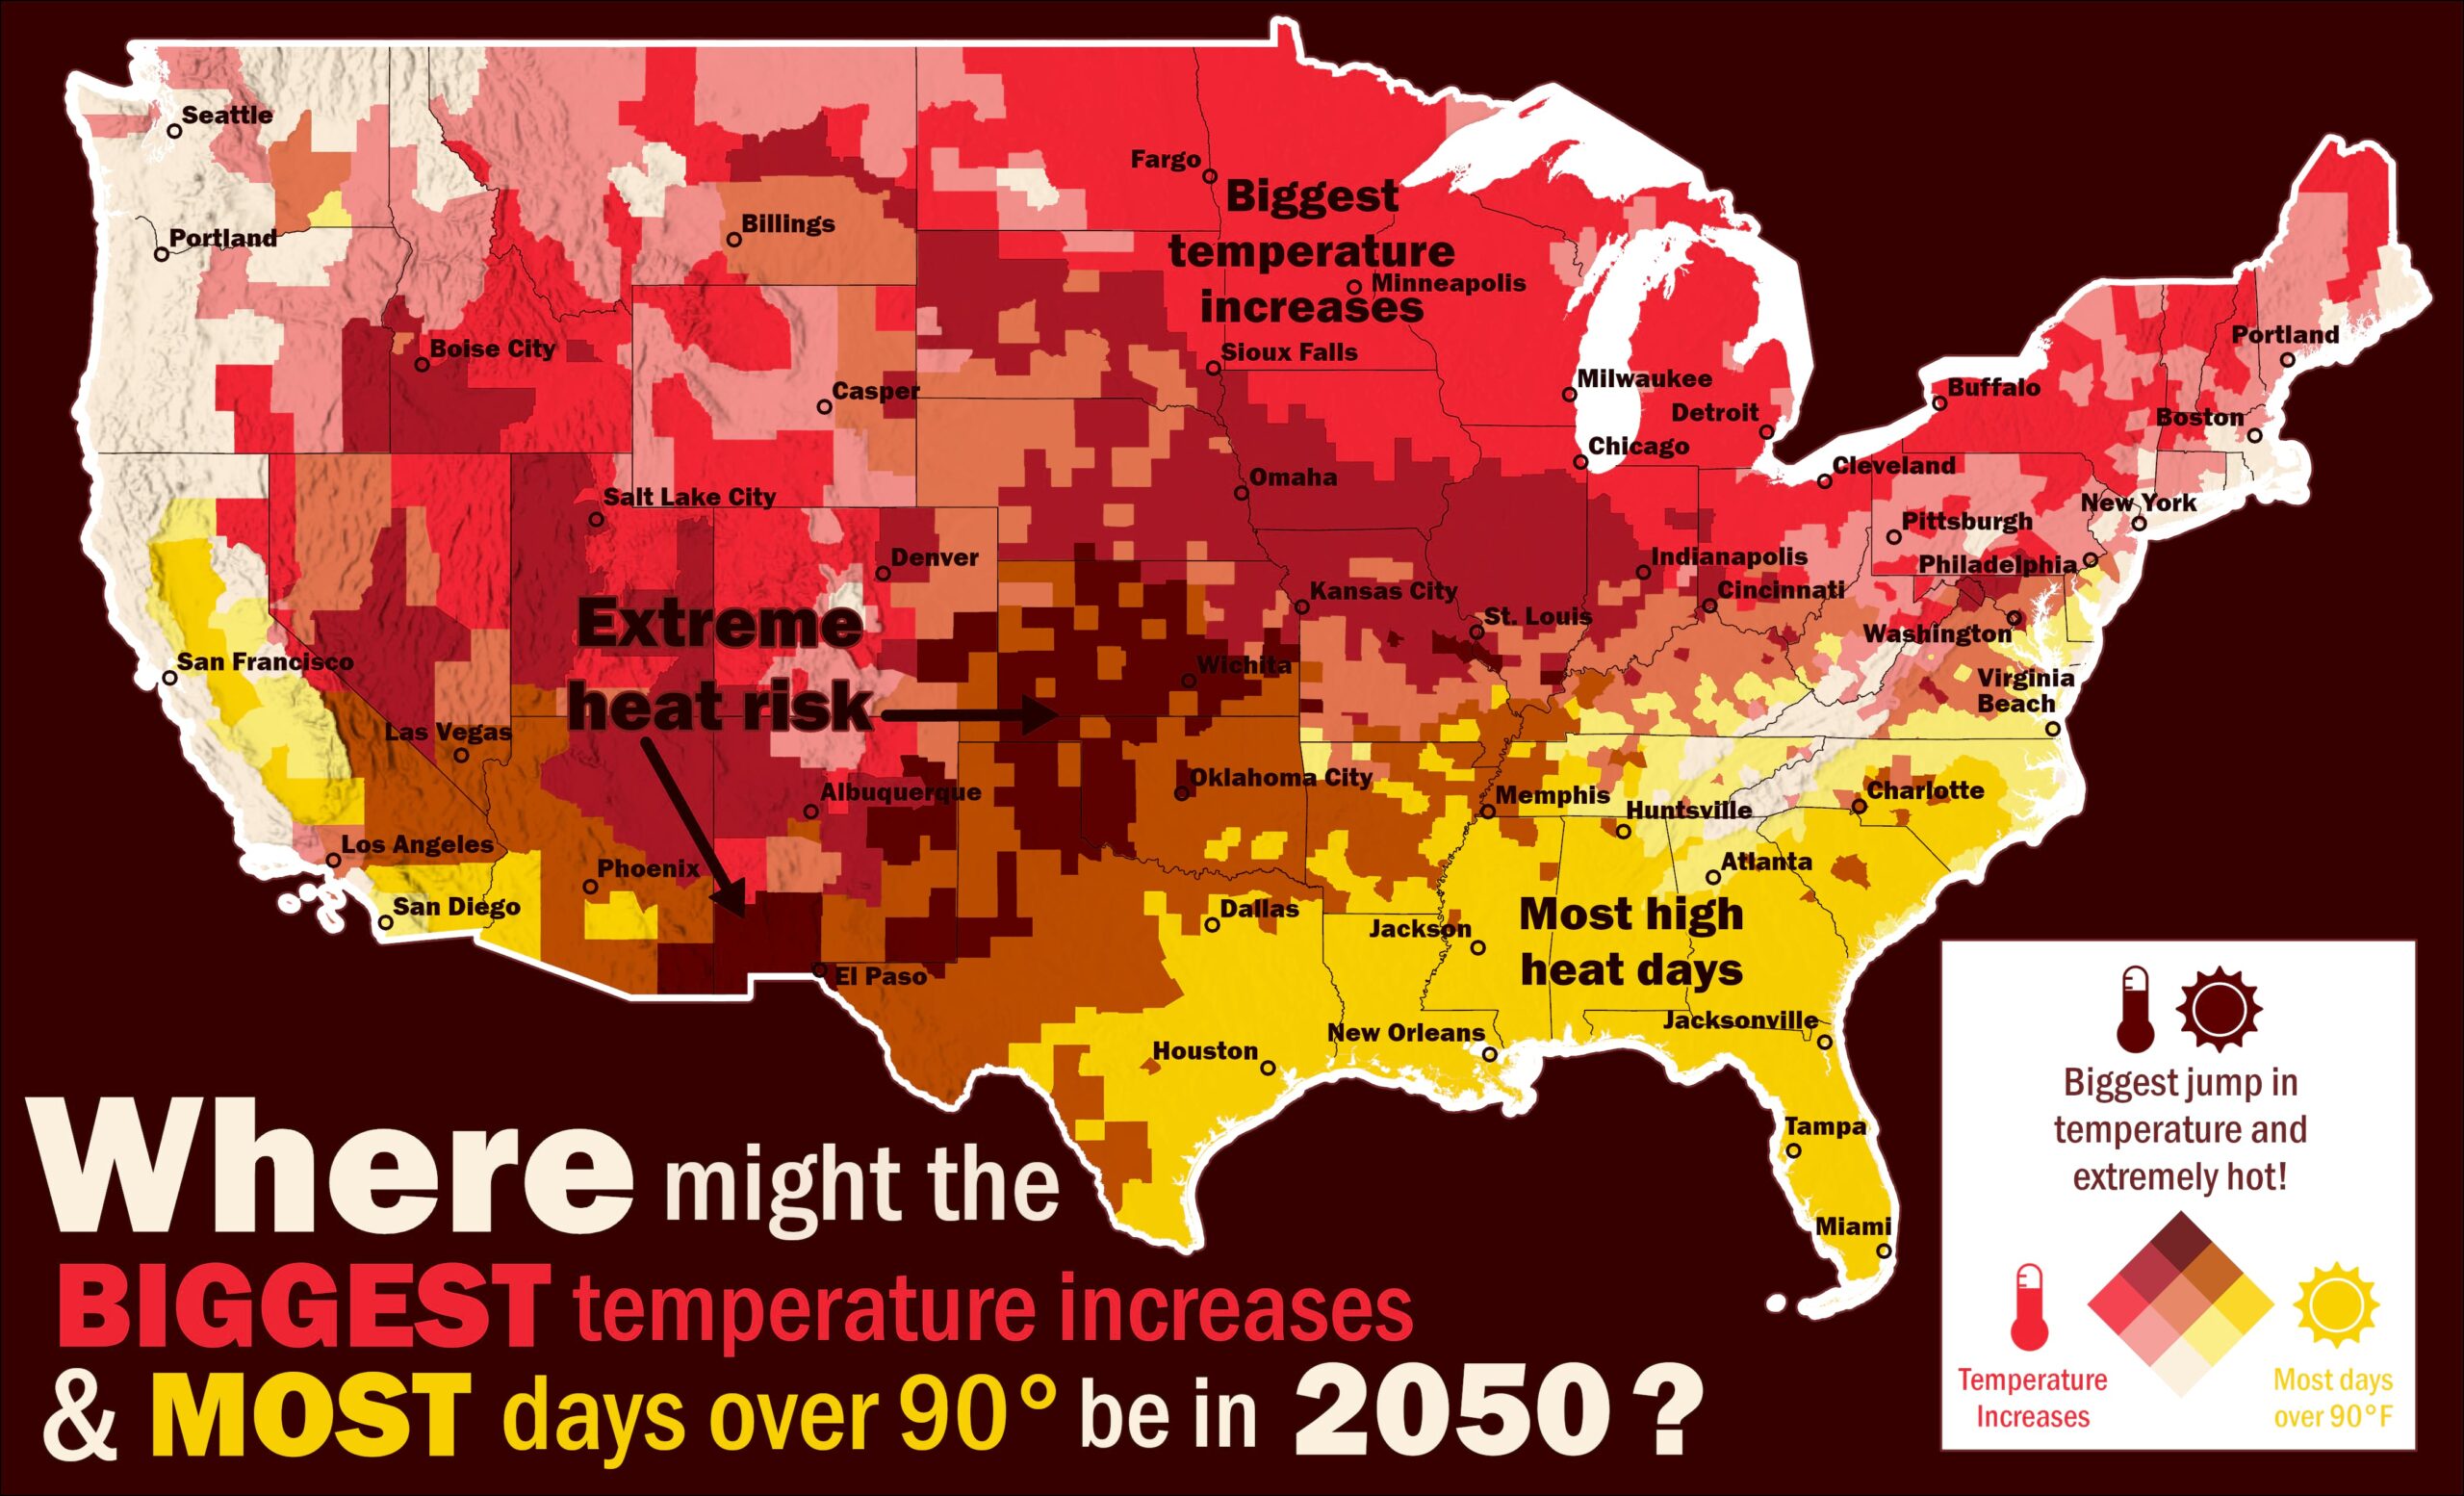 This compounded heat risk map shows where heat may be both dangerous (may days of deadly heat over 90°F) and much higher than historical maximums (greatest temperature increases). The intersection of these two risks, in dark brown and concentrated around New Mexico Texas, and Oklahoma, shows areas where heat is both extreme and unprecedented.